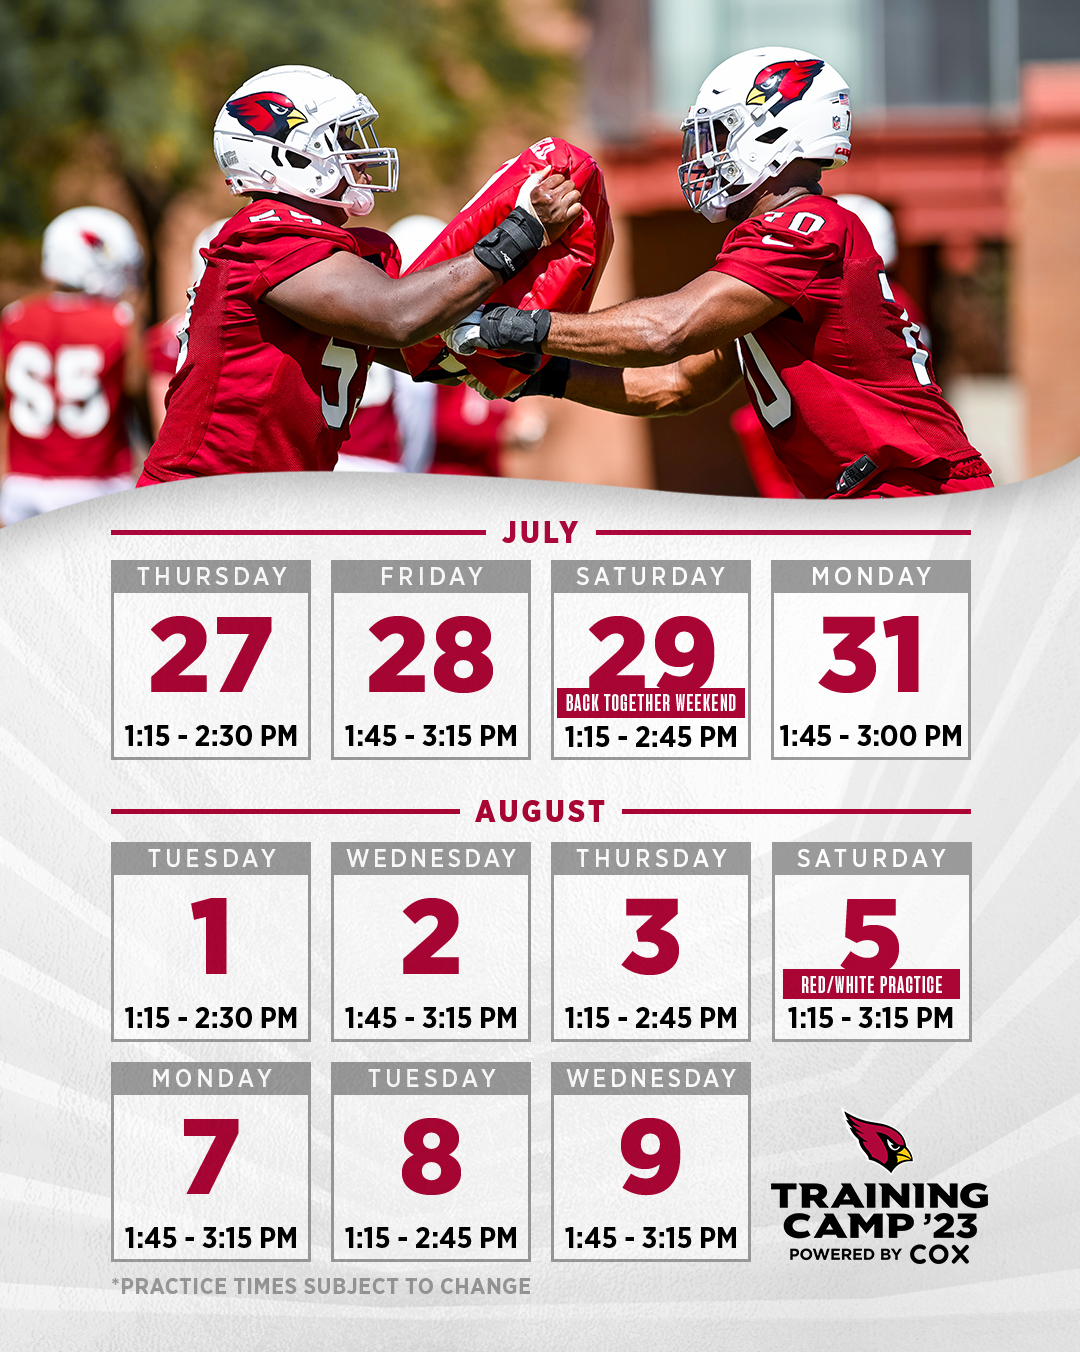 Arizona Cardinals on Twitter: One week until training camp, who